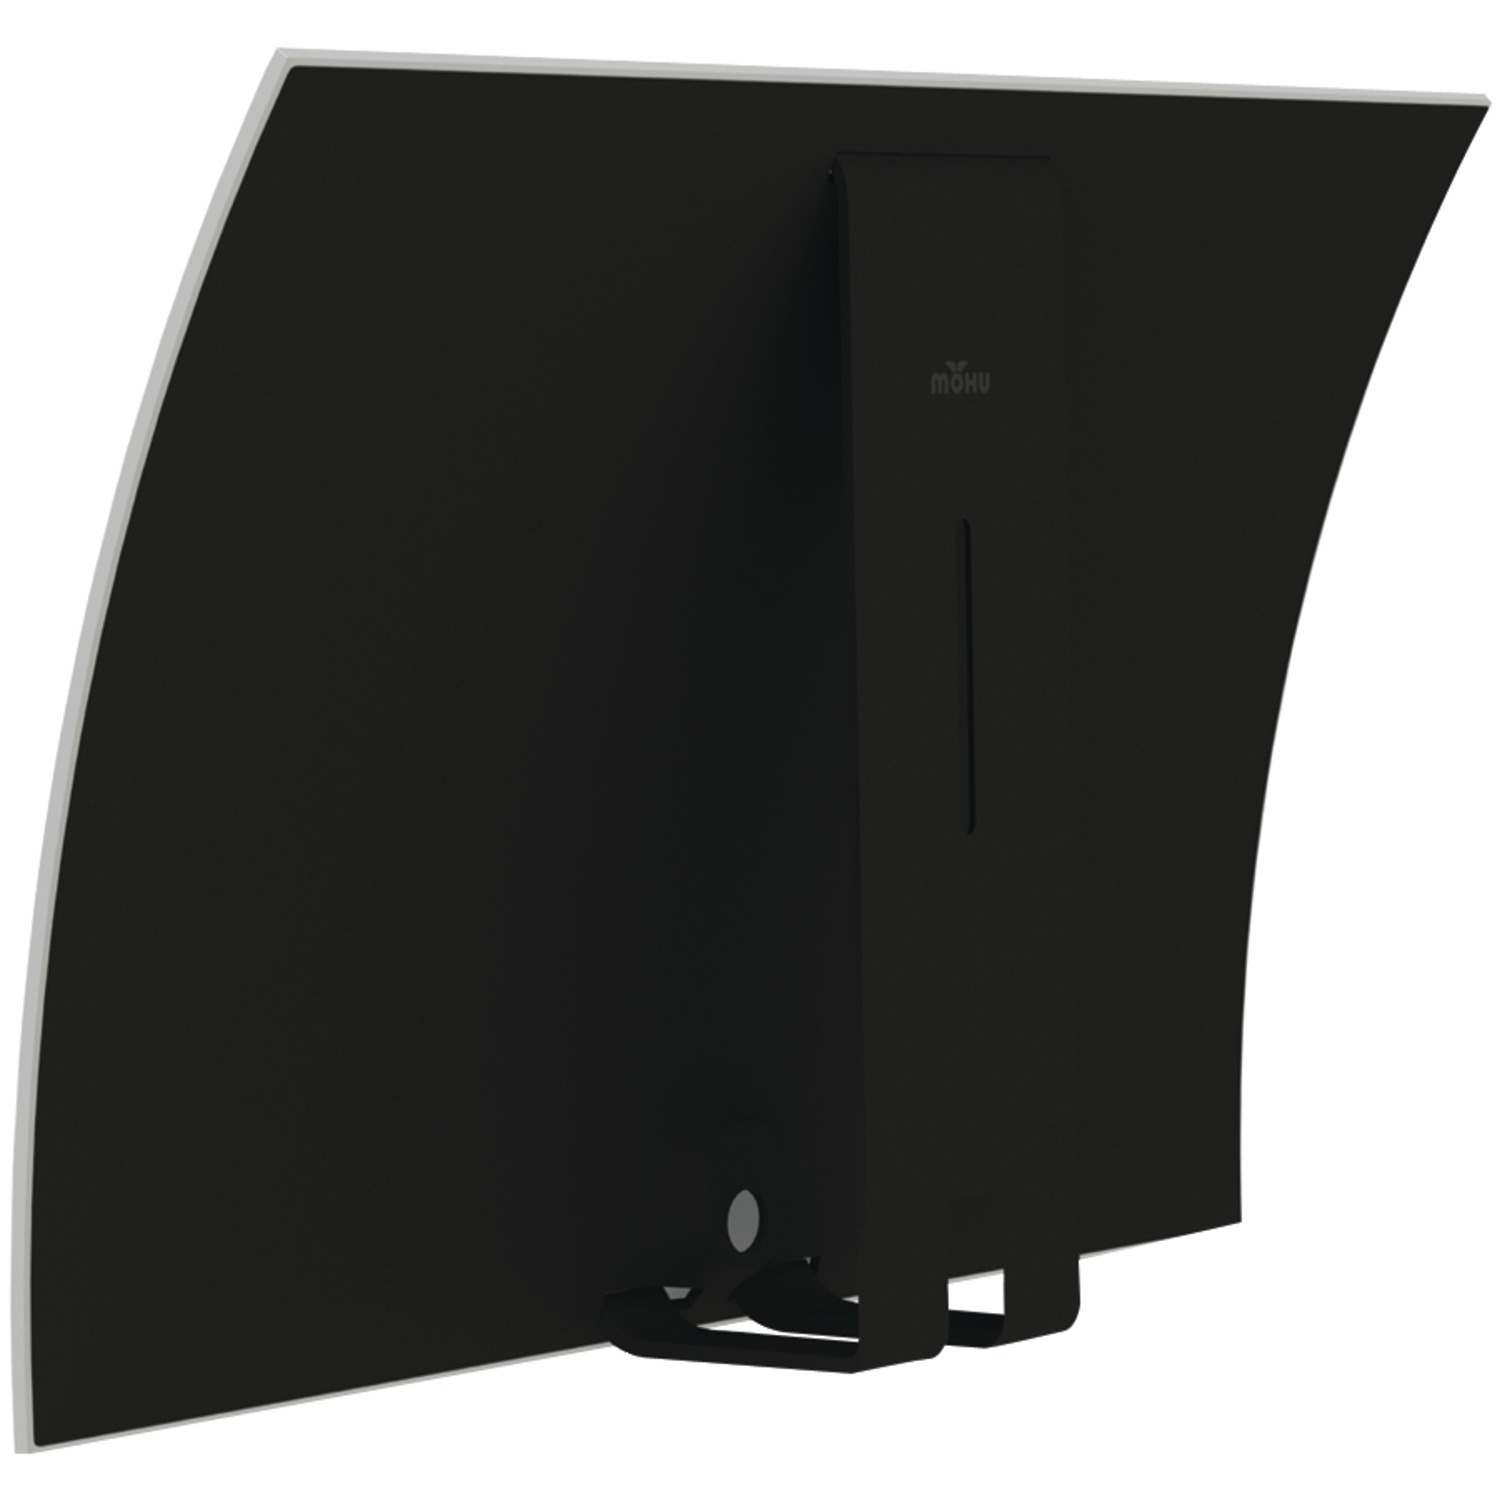 Mohu Curve 30 Designer Table Top 30-Mile Indoor HDTV Antenna - image 3 of 15